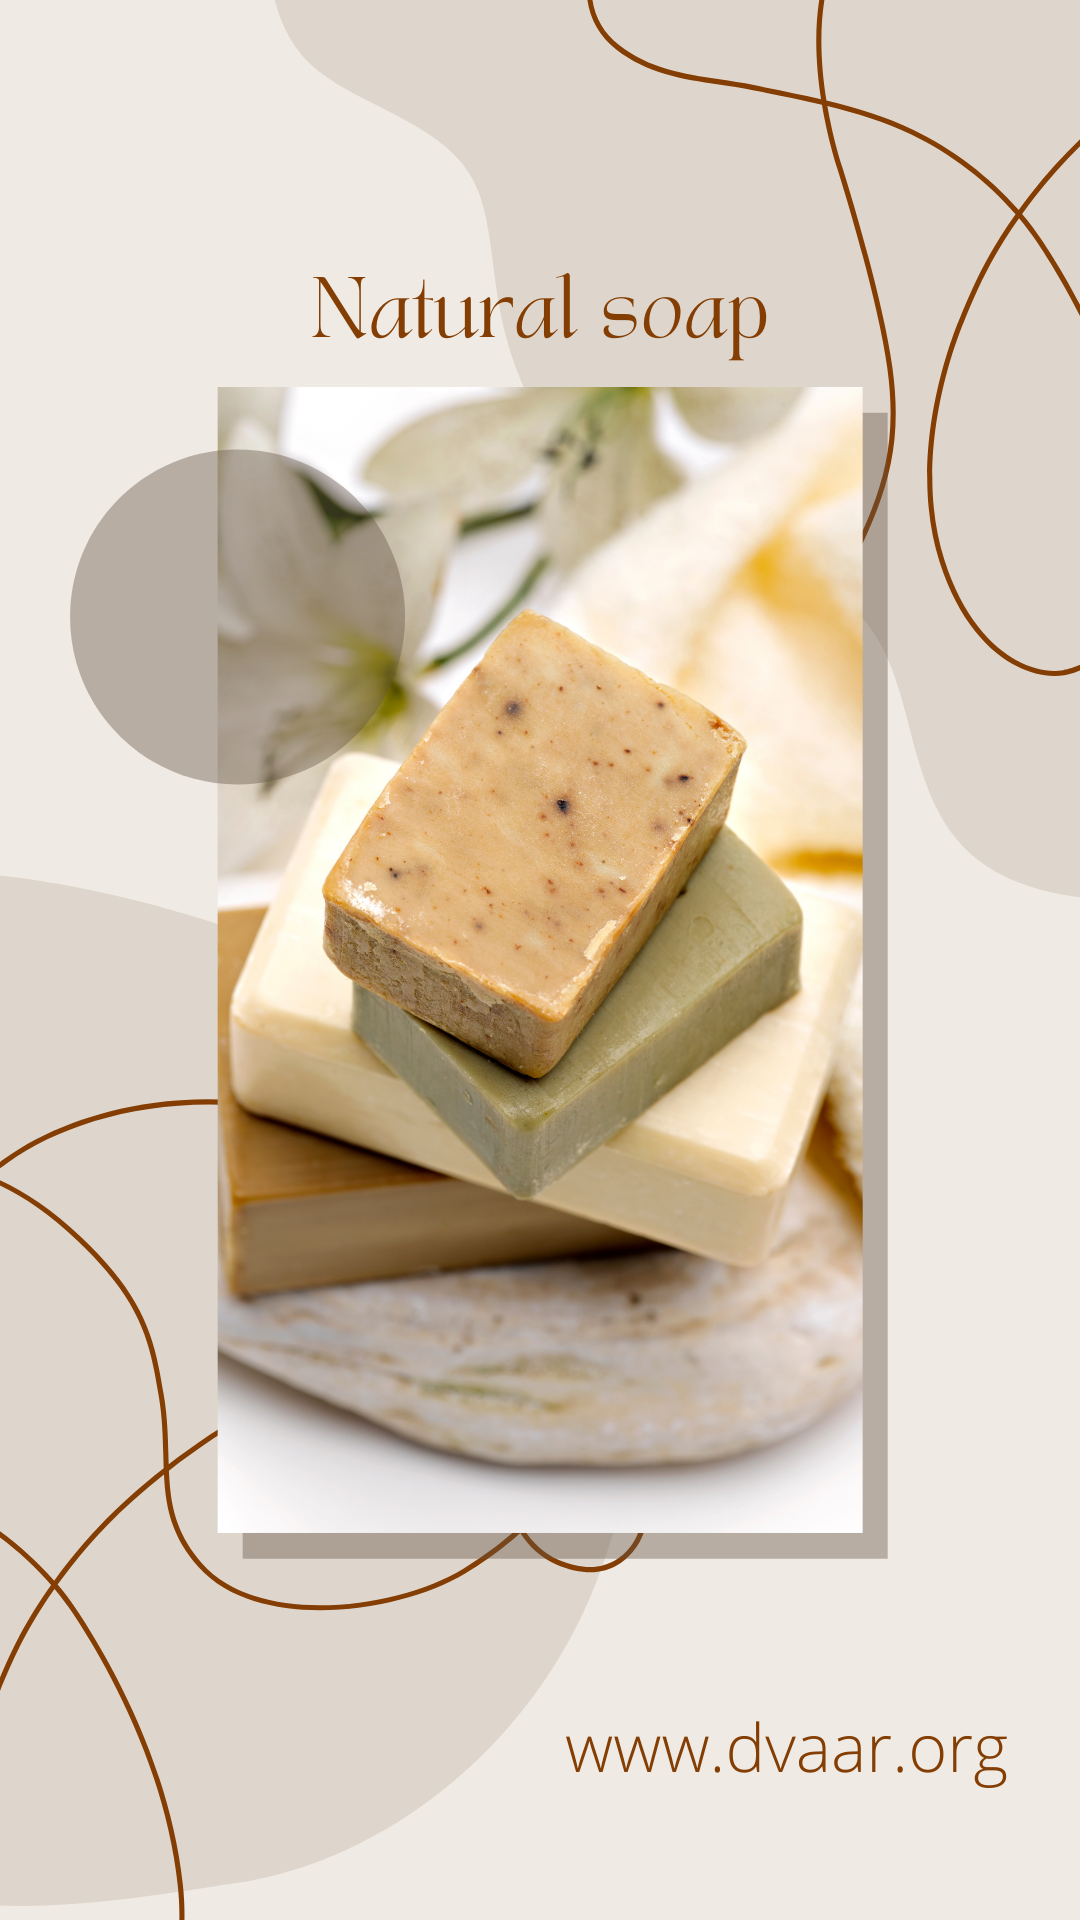 A quick read on natural soaps and their benefits